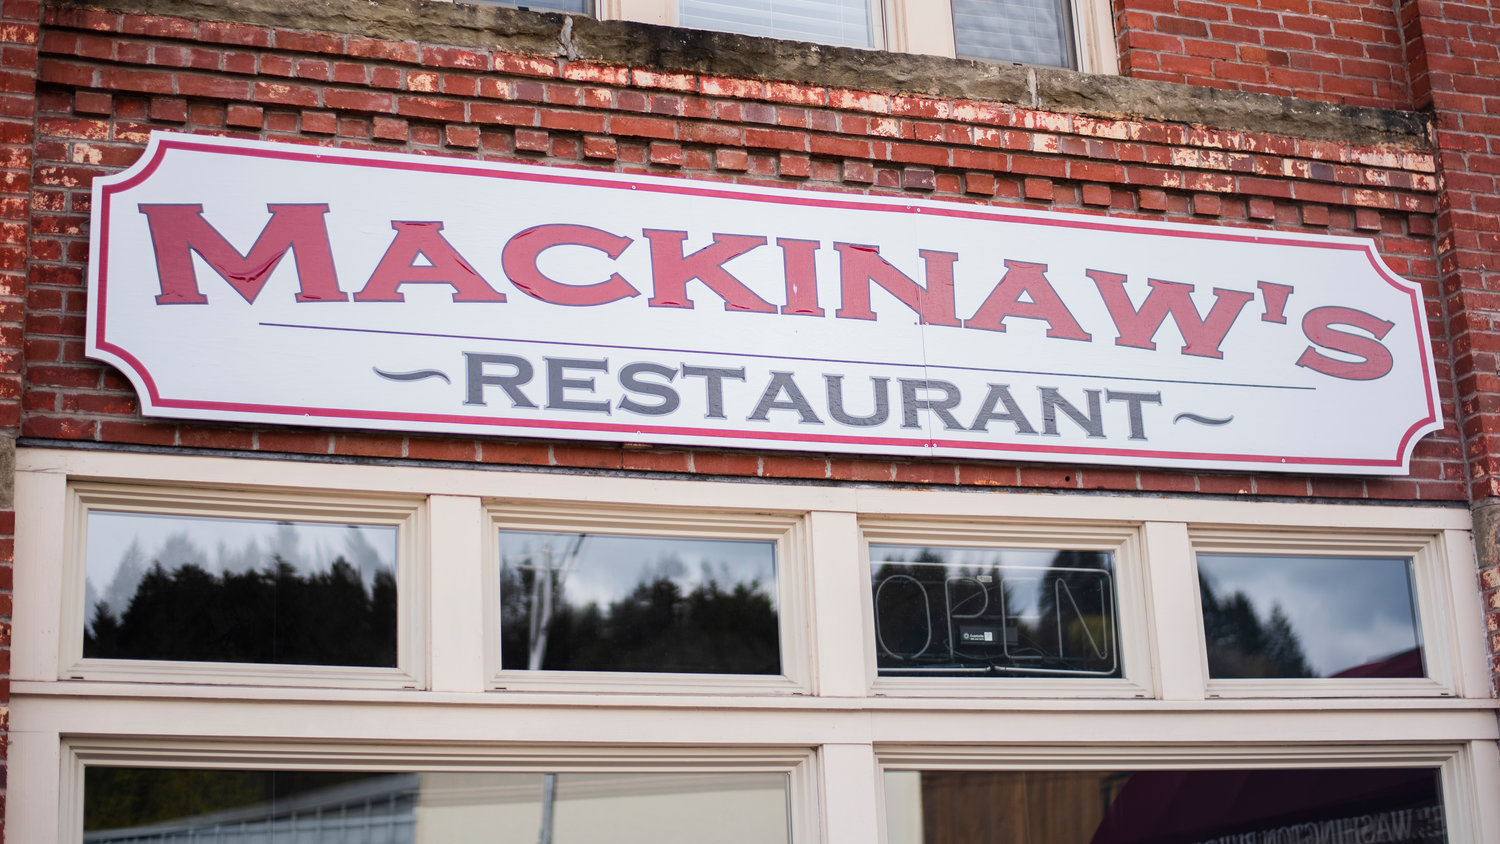 Mackinaw’s signage hangs on display in downtown Chehalis.